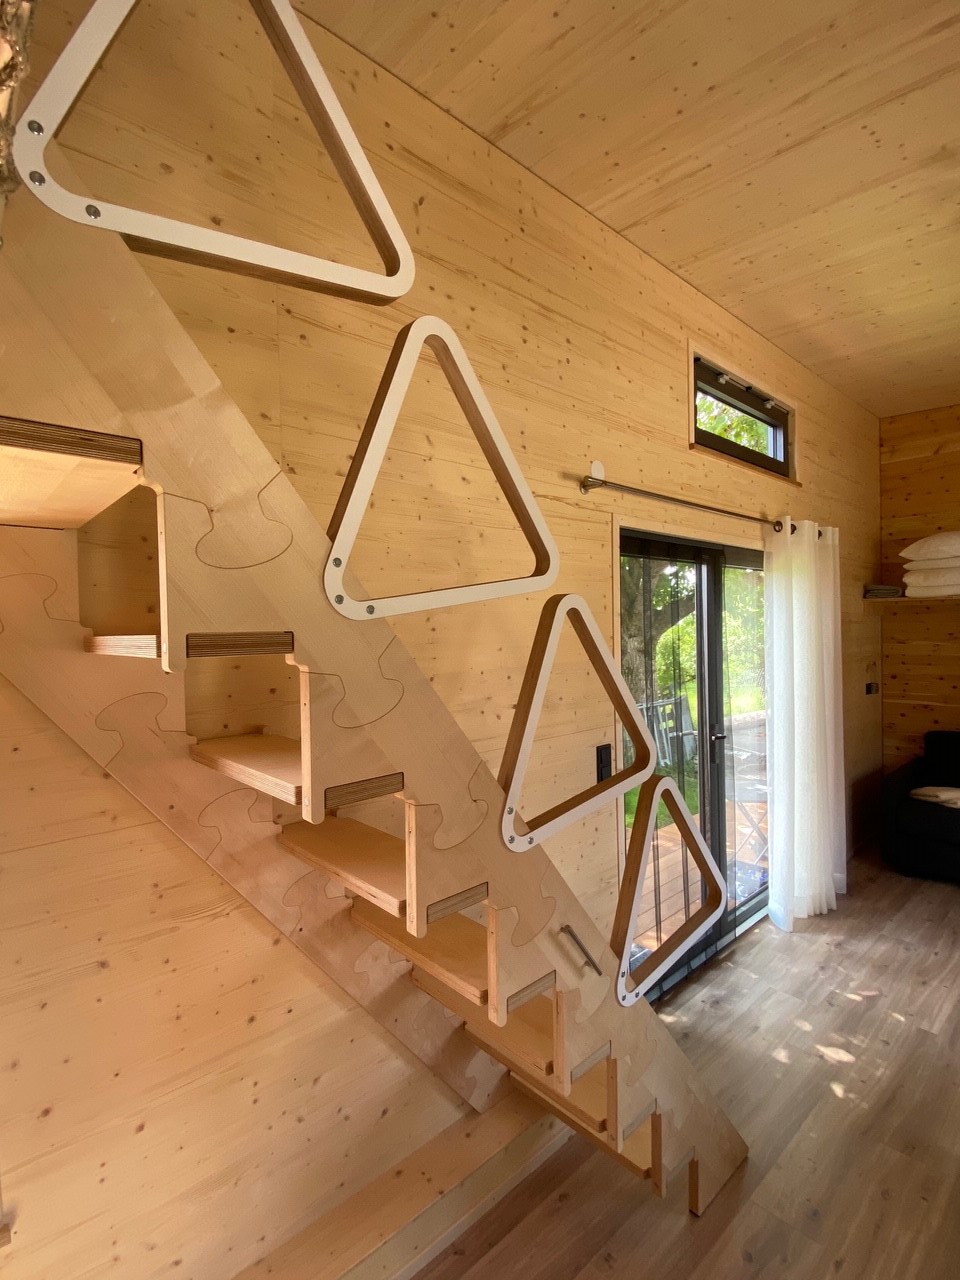 Klapster Folding Staircase for tiny homes or small apartments